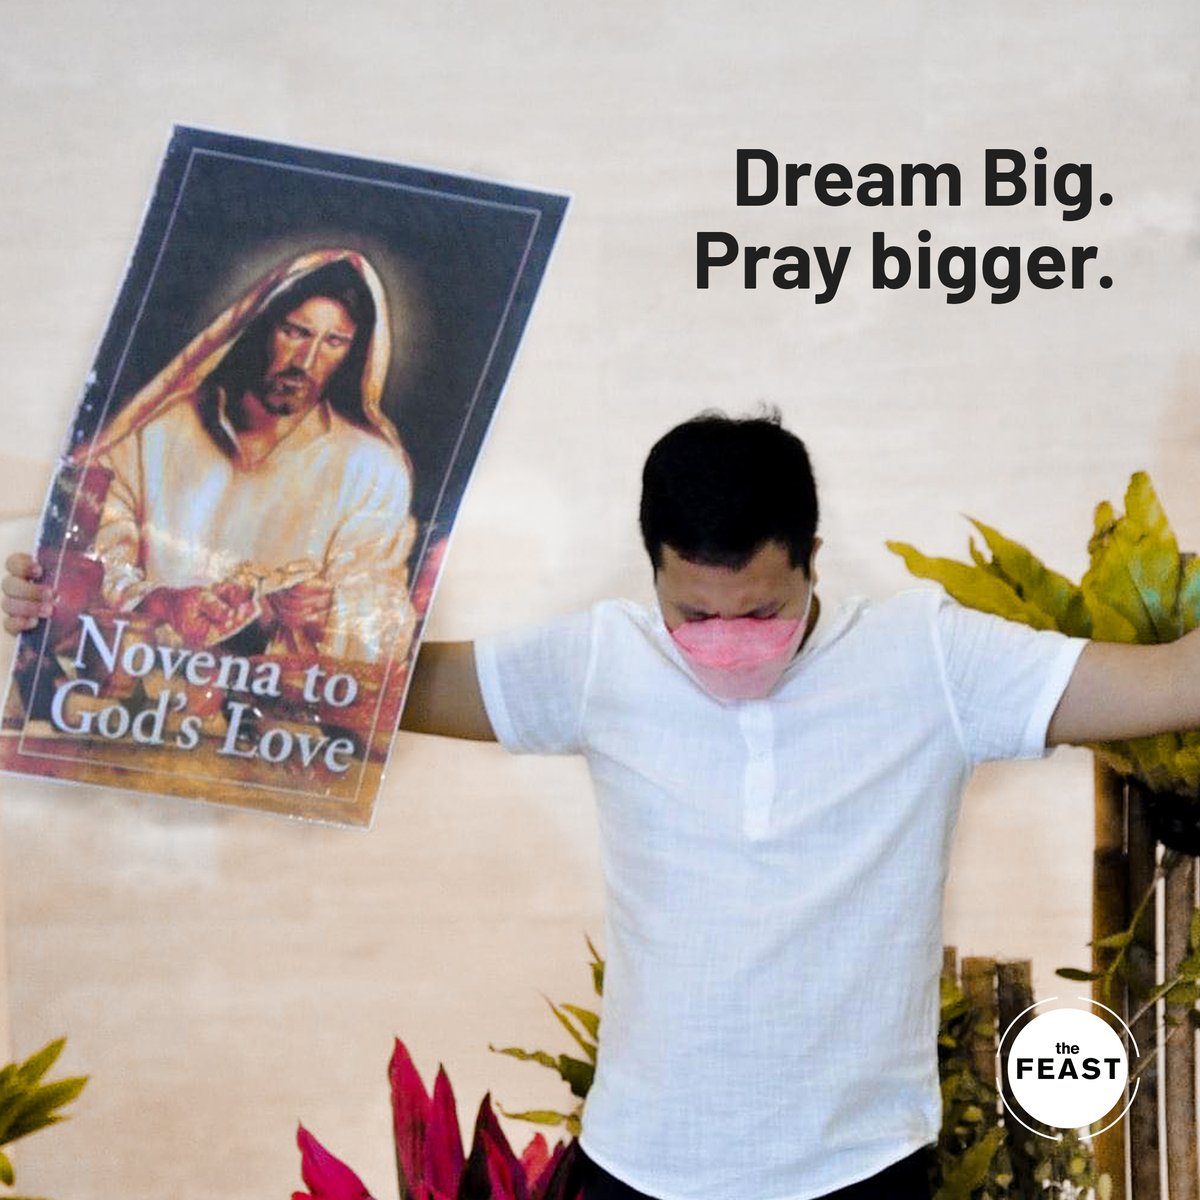 The 'Novena To God's Love' is powerful. Many have written their 7 Dreams in that little booklet, making them come true. Get yours from the Feast nearest you or download the app to your mobile phone. ctto: Feast Caloocan #TheFeast #Youareloved